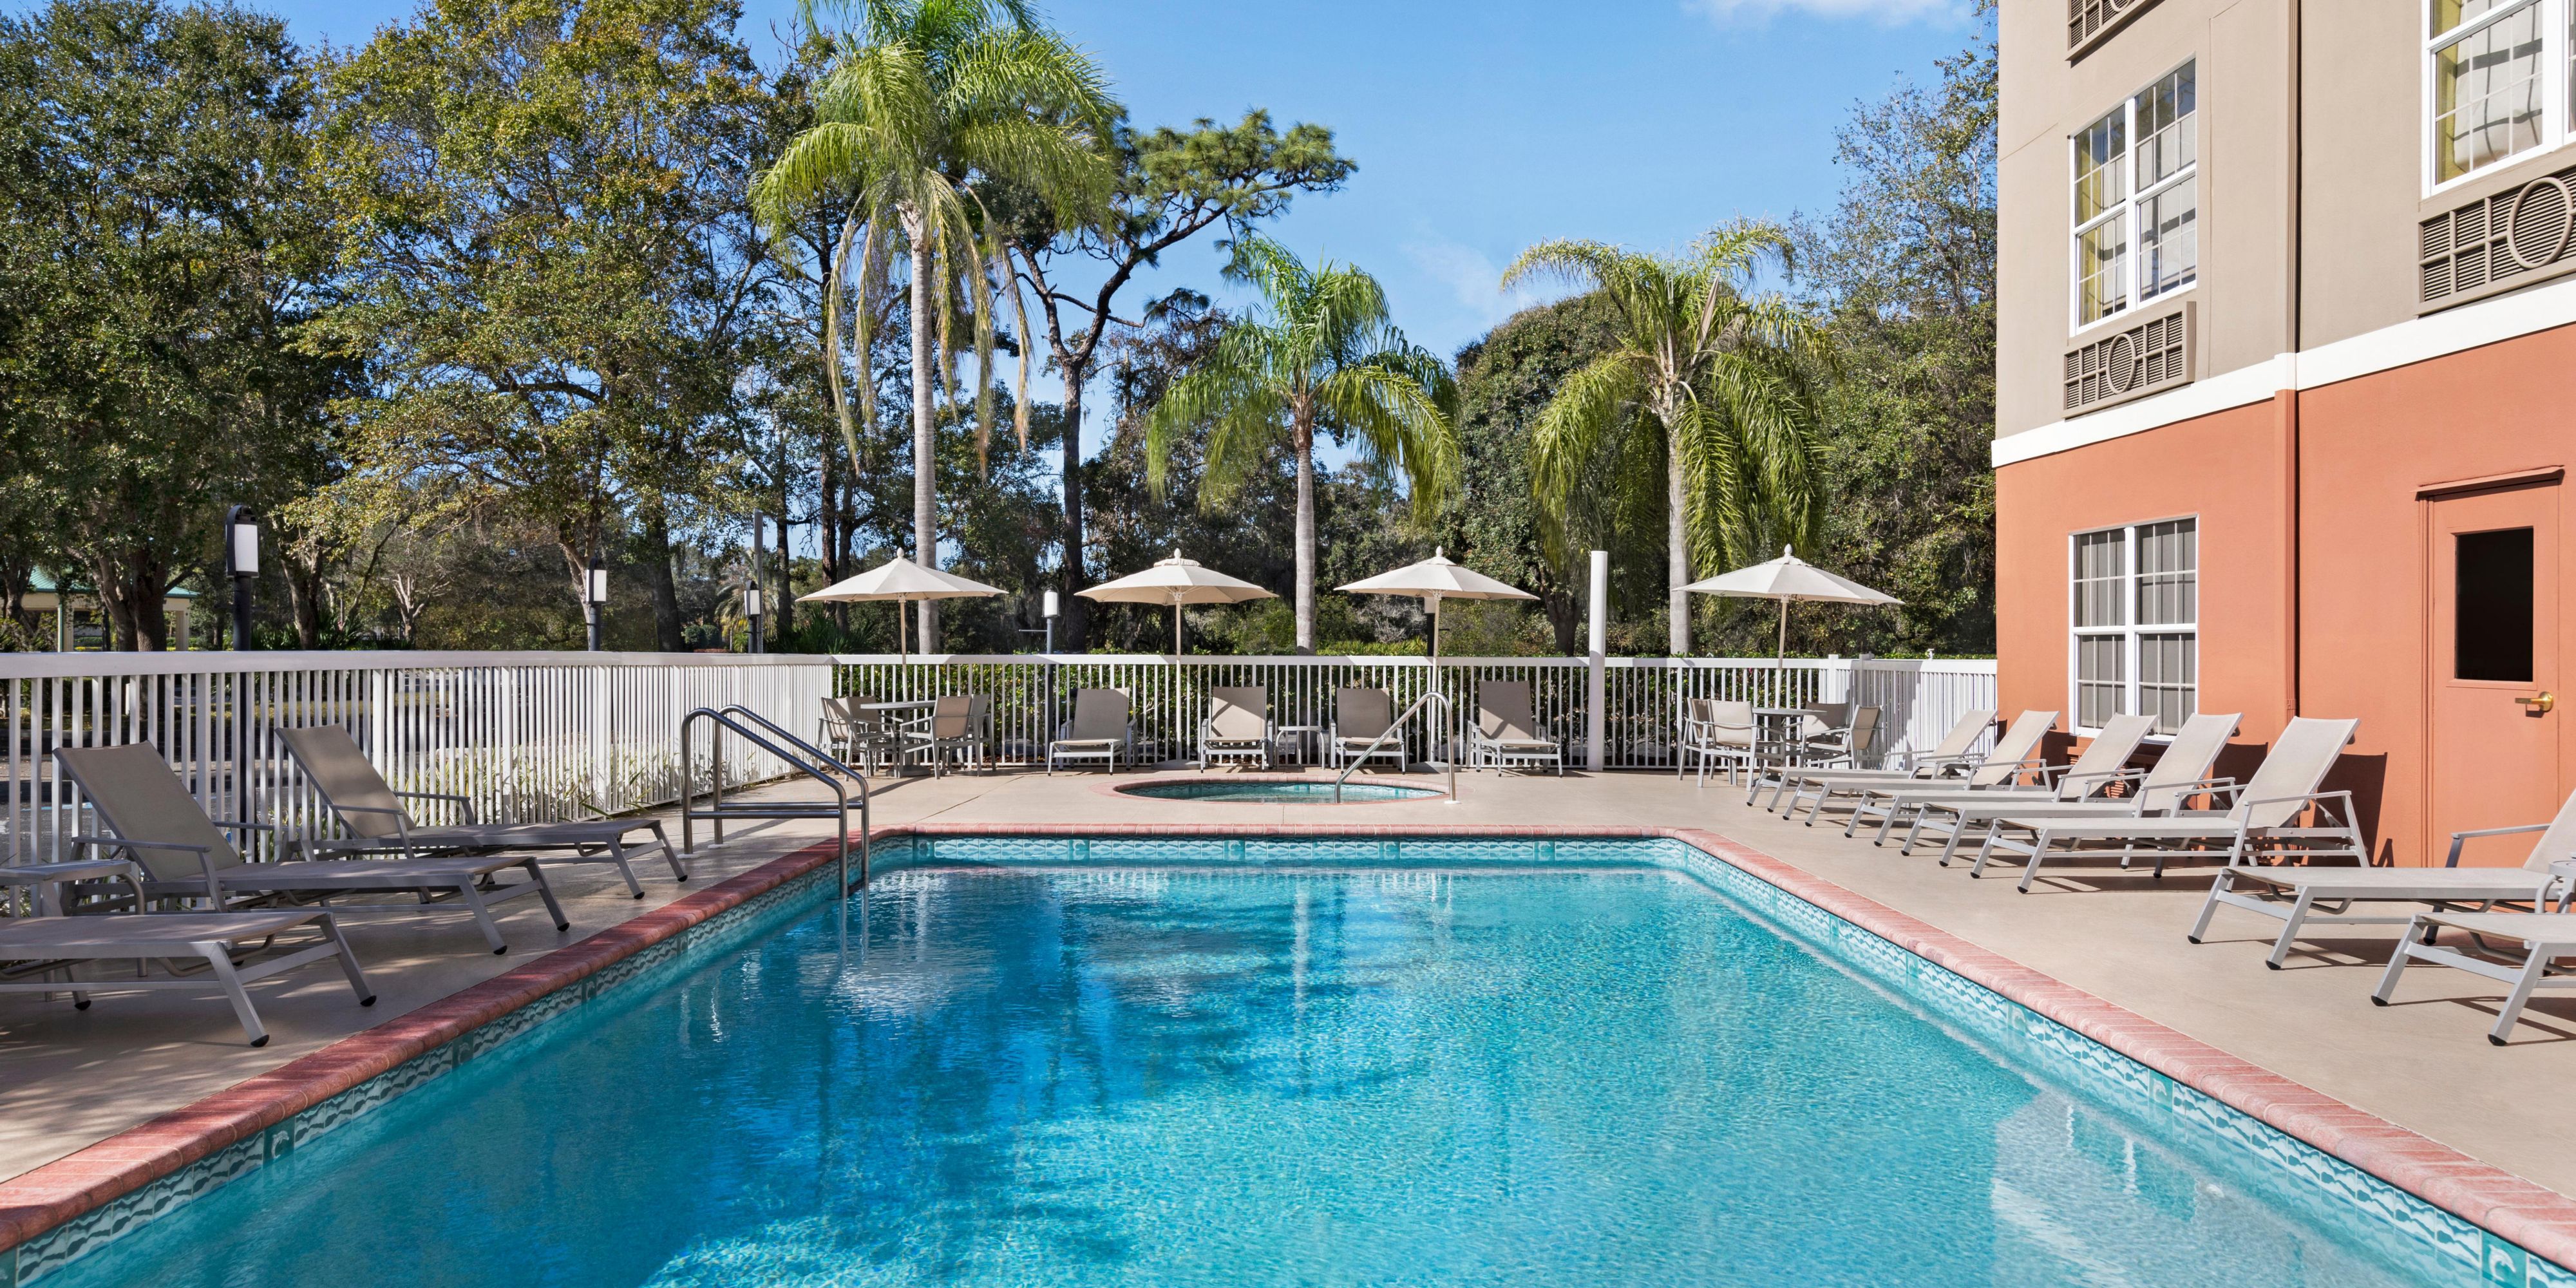 Enjoy swimming in our hotel’s heated outdoor pool during your stay in Sarasota, Florida. Our pool is conveniently open daily from 7 a.m. - 9 p.m.